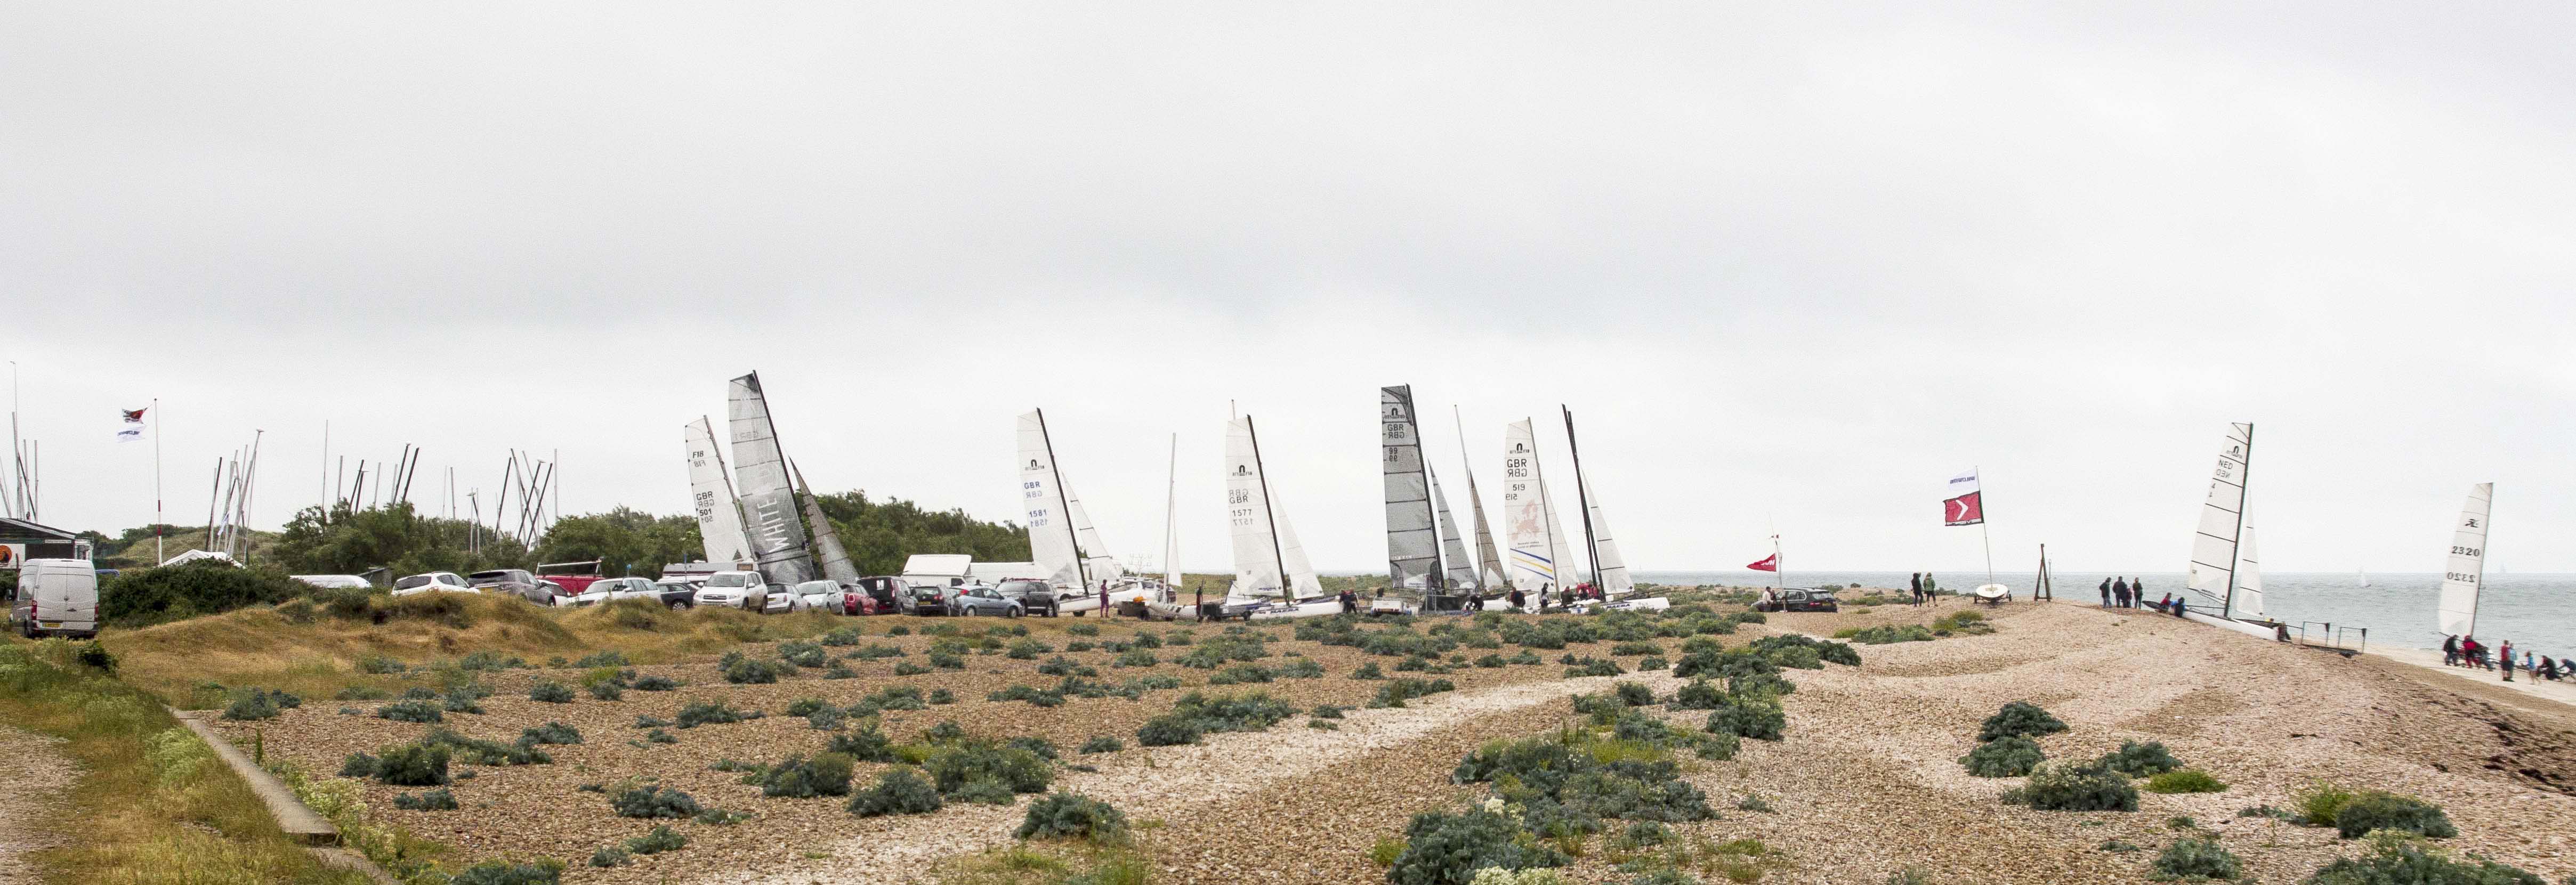 Boats lined up ready to launch for the start of the 2016 Solent Forts Race